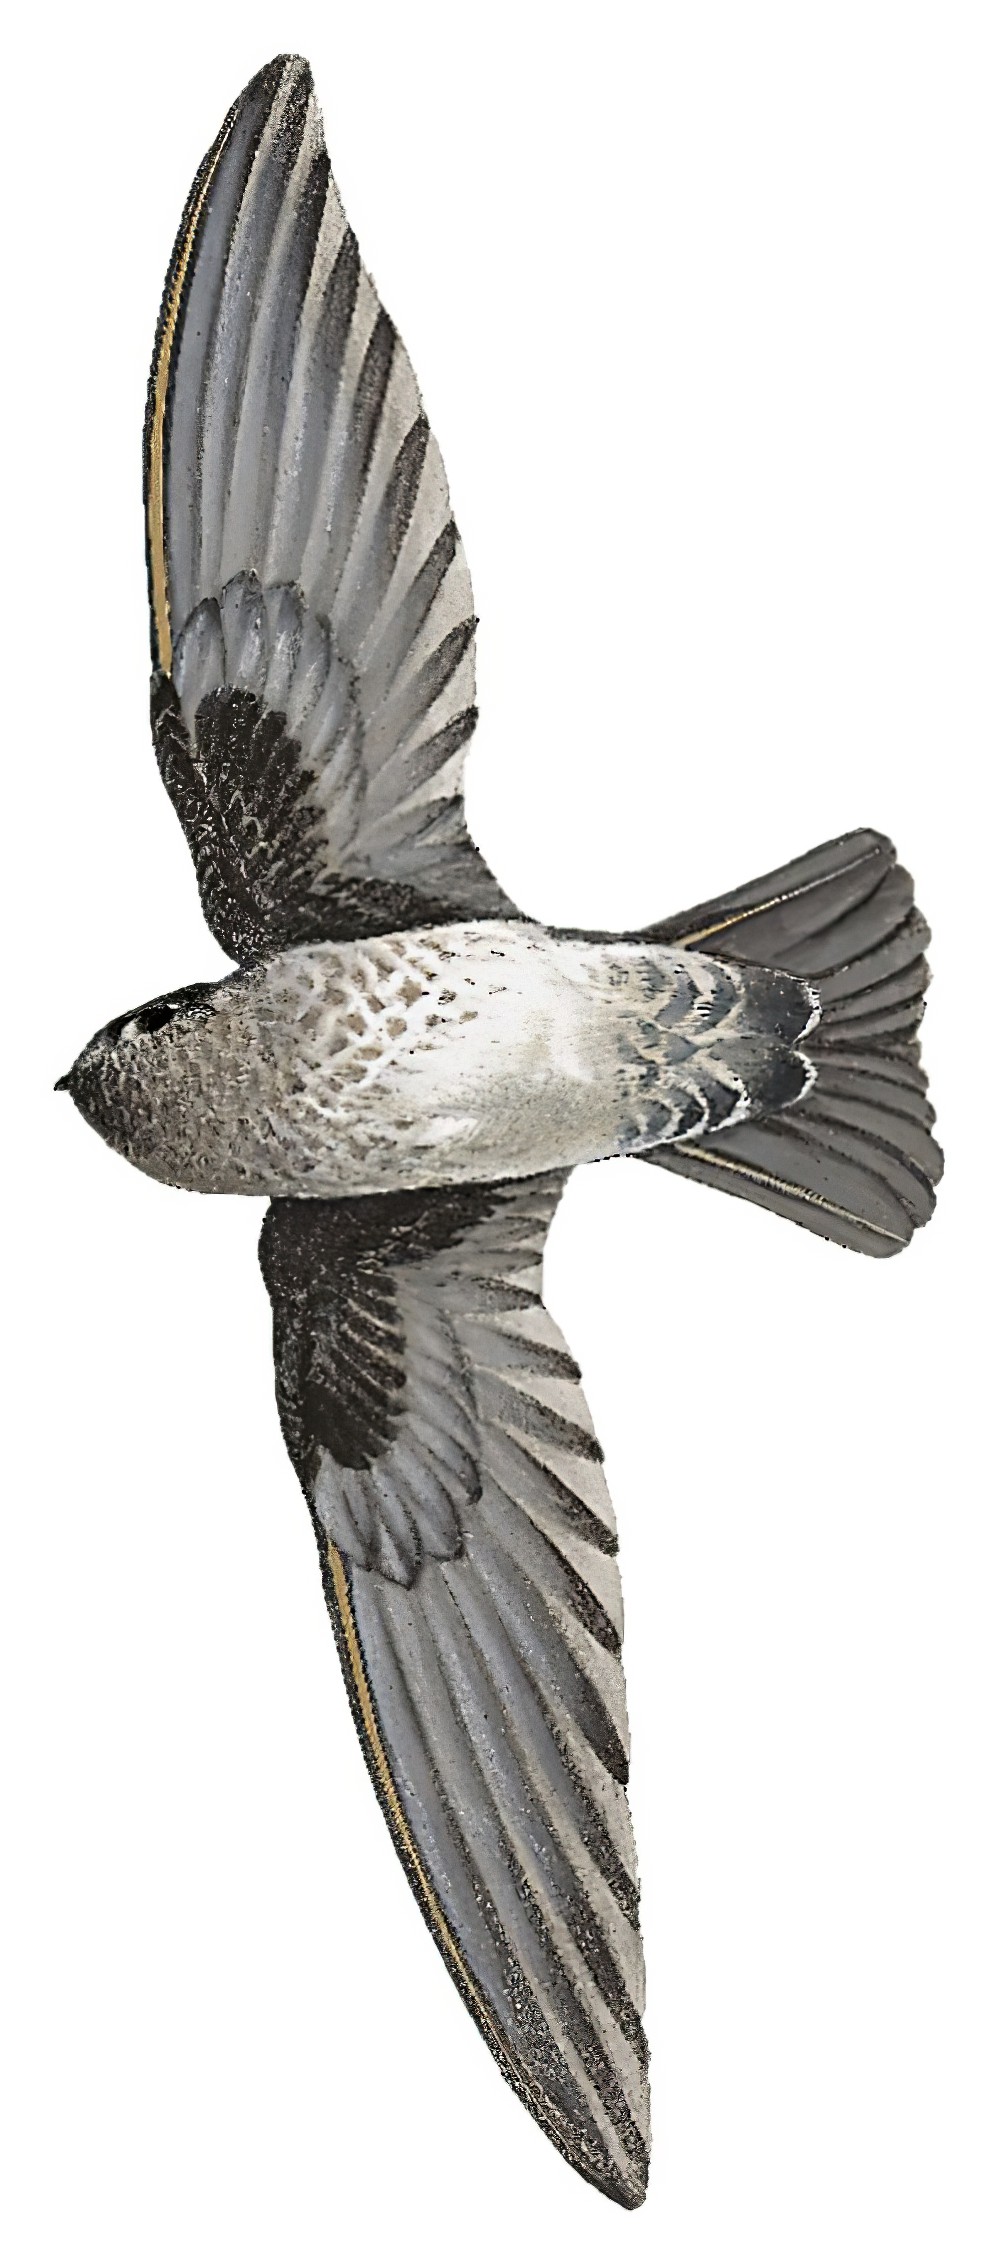 Plume-toed Swiftlet / Collocalia affinis